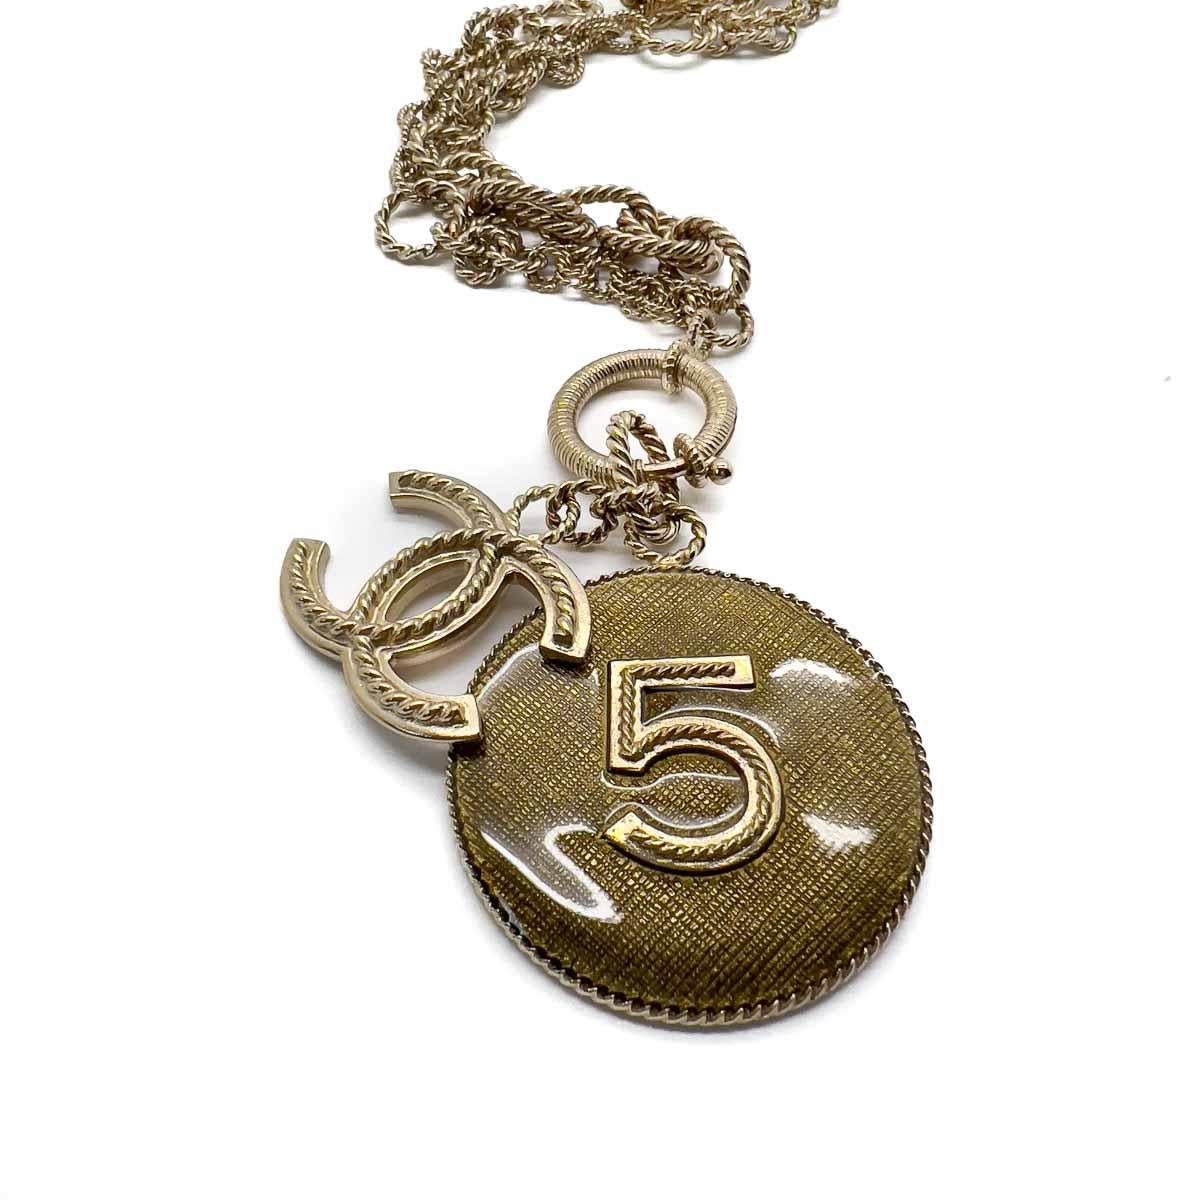 Vintage Chanel No. 5 Rope Chain Charm Necklace 2013 For Sale 1